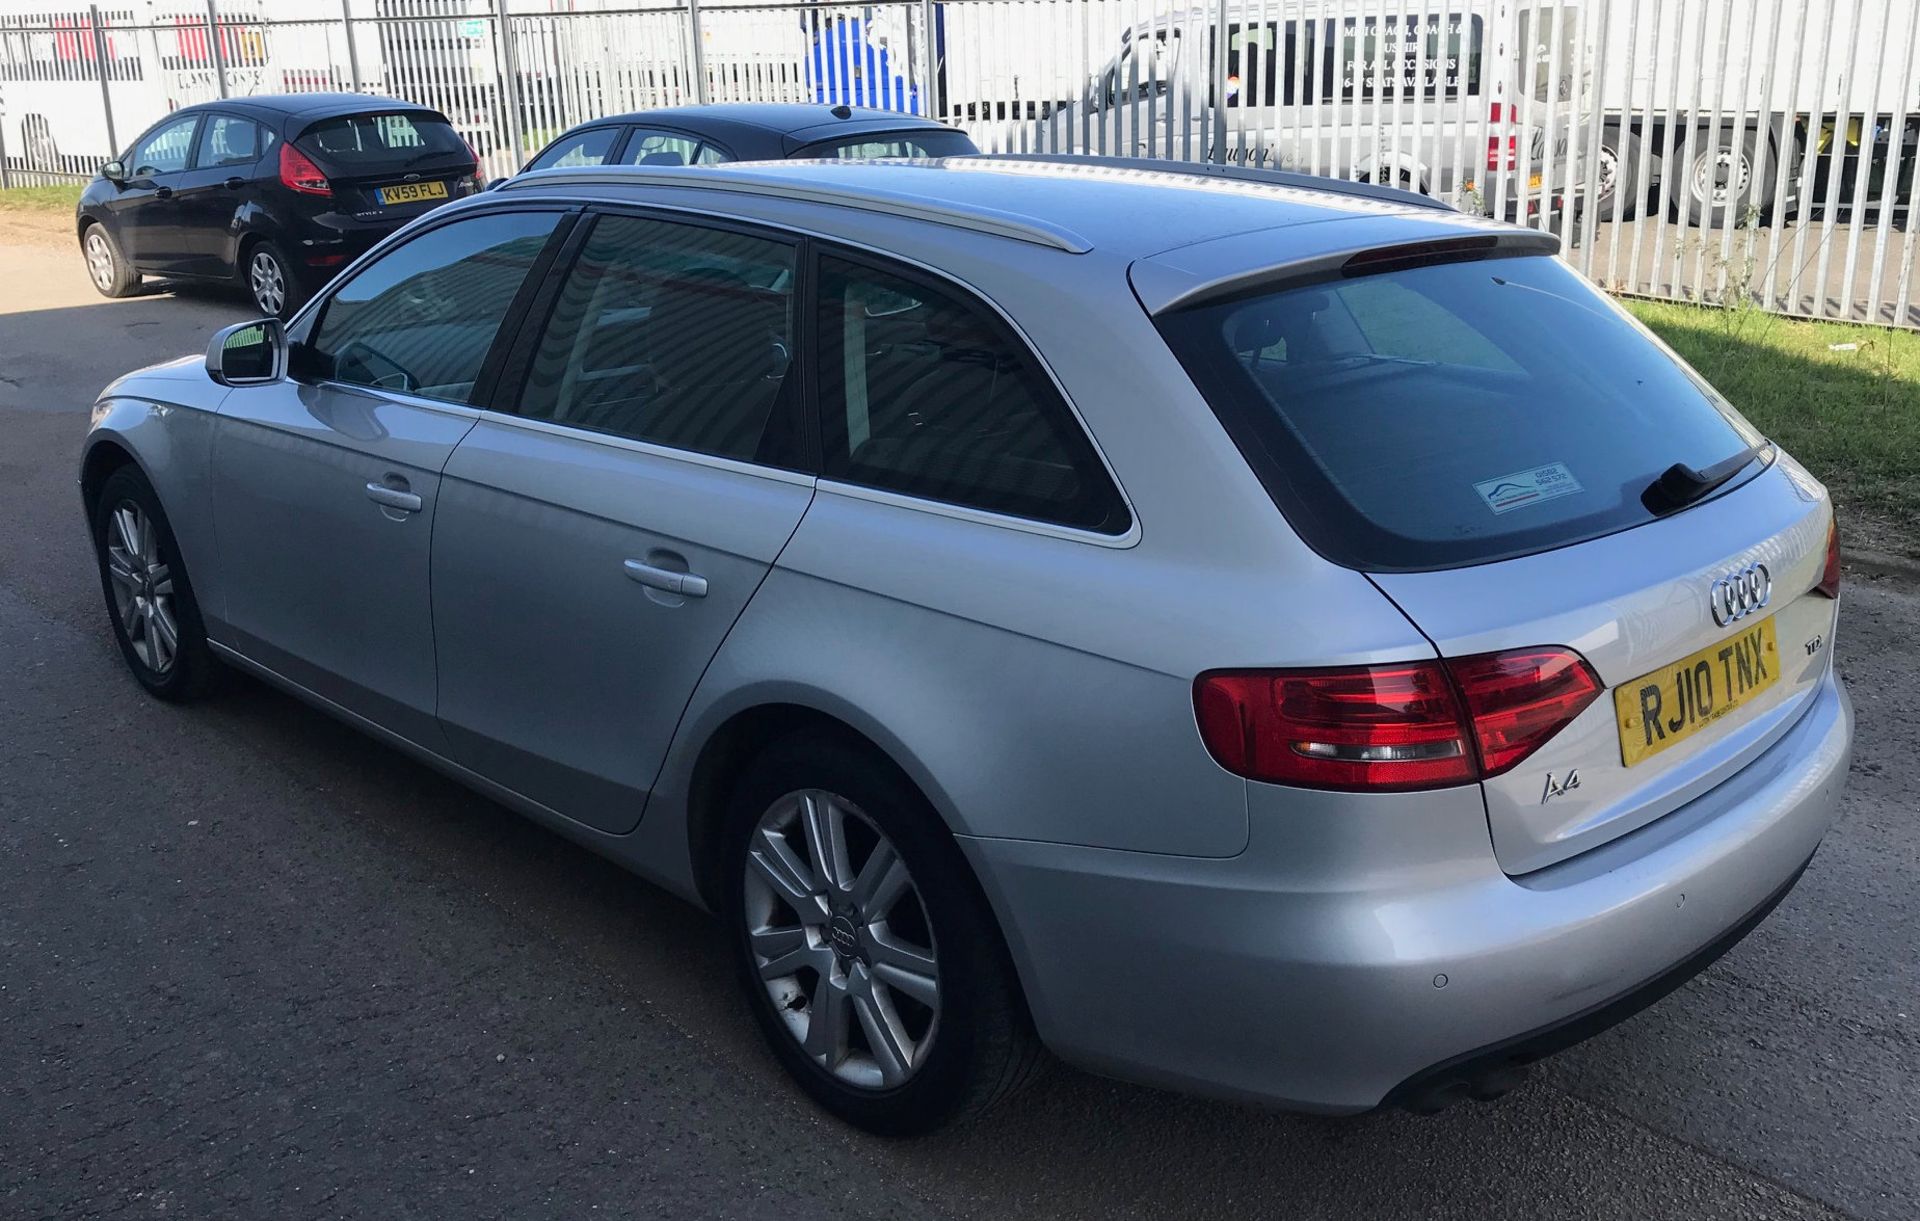 2012 Audi A4 2.0 Tdi SE Avant Automatic 5 Door Estate - CL505 - NO VAT ON THE HAMMER - Location: - Image 3 of 13